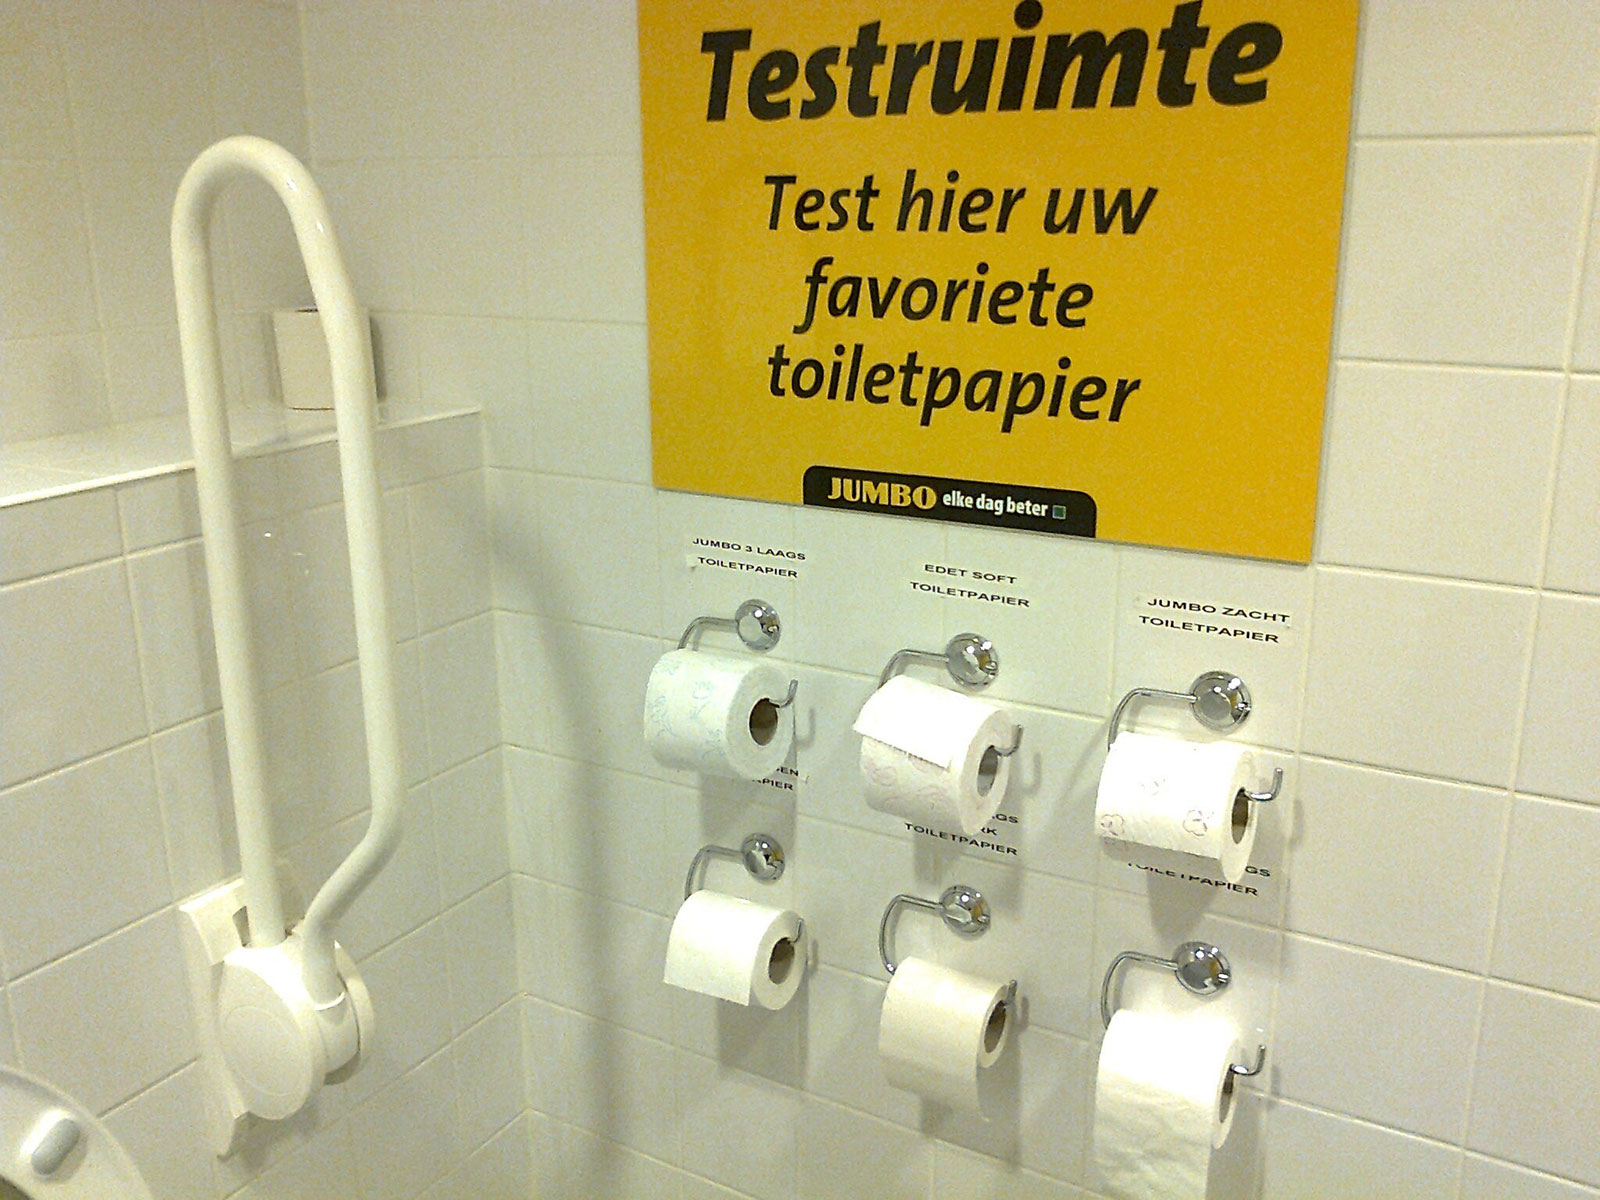 This toilet at a Dutch Supermarket lets you test the brands of toilet paper they sell.